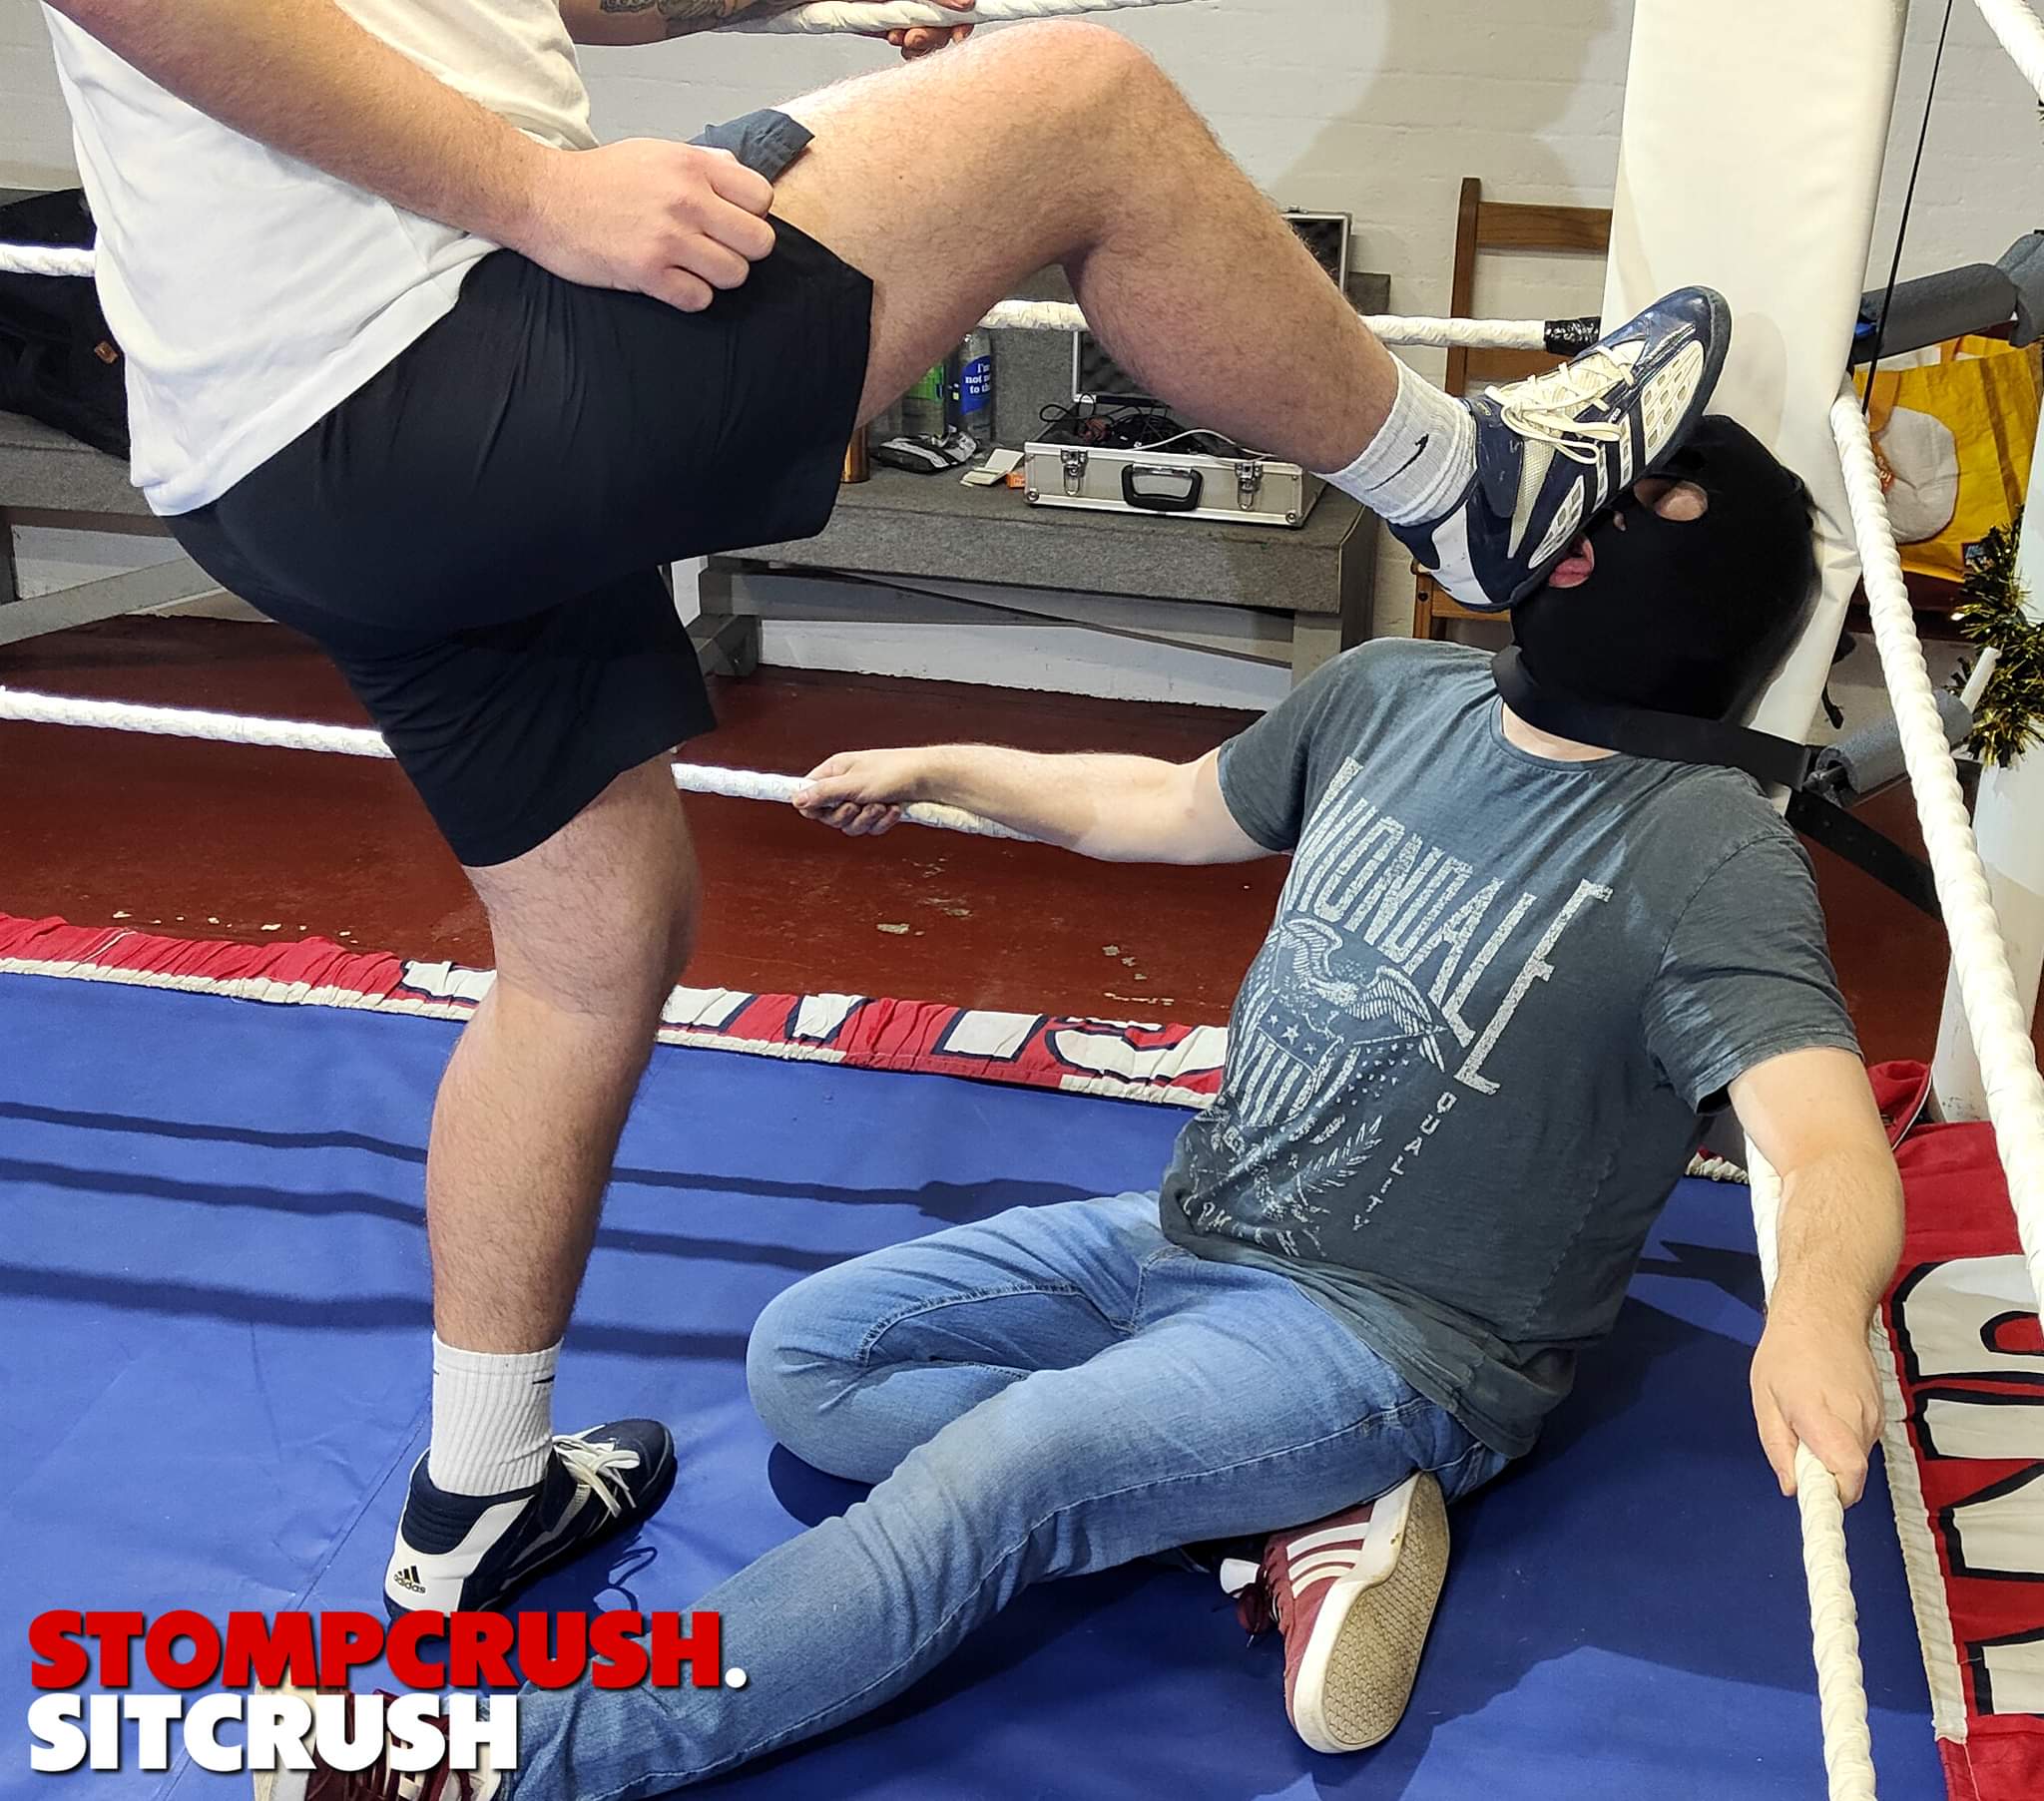 Another NEW vid from us. Licking alphas wrestling boots